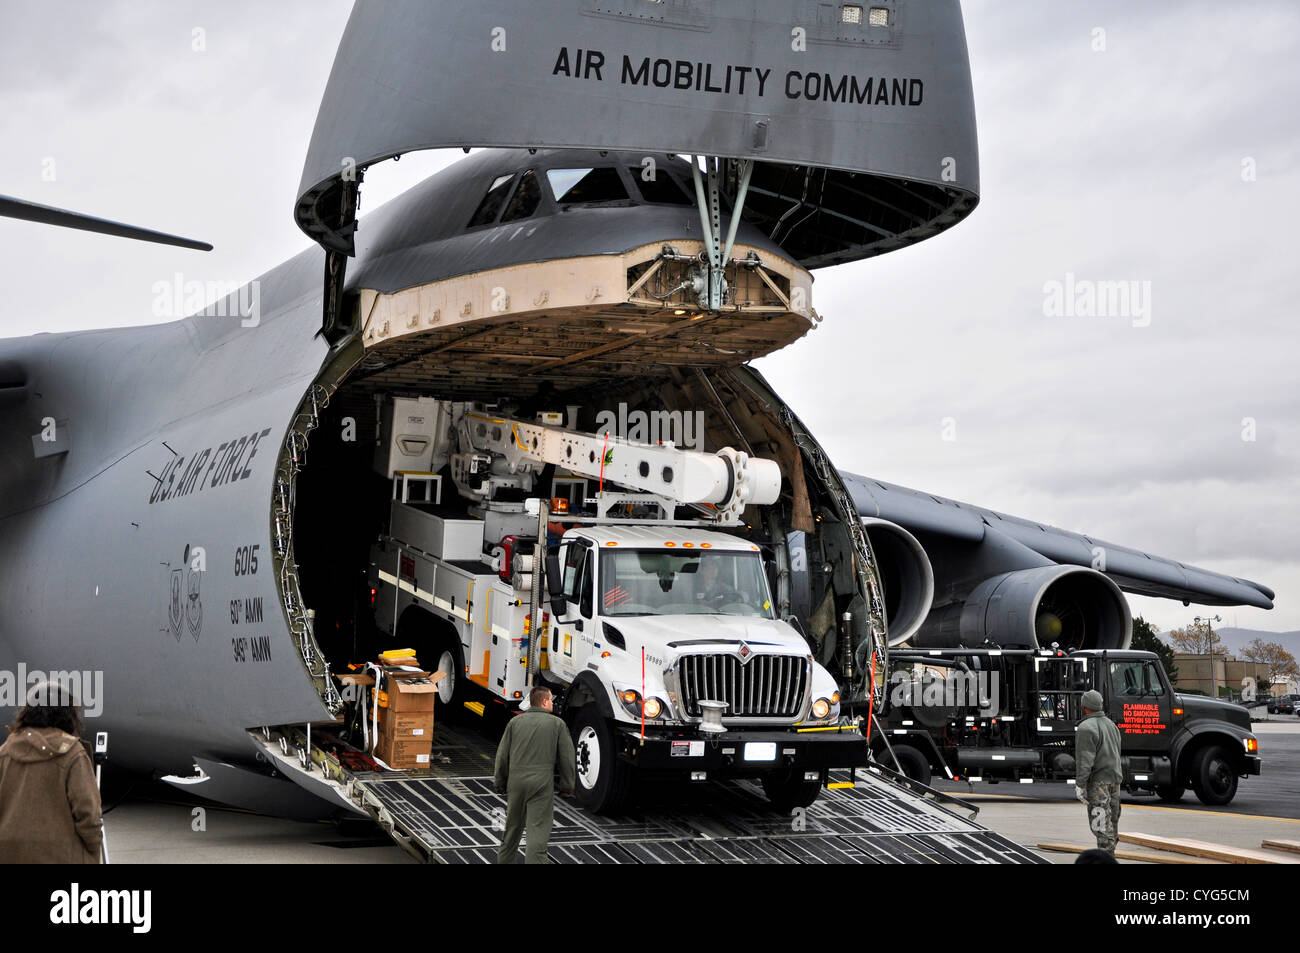 US Air Force airmen unload power repair equipment belonging to Southern California Edison from a C-5 Galaxy aircraft at Stewart Air National Guard Base November 1, 2012 in Newburgh, N.Y. The Department of Defense initiated the airlift operation to aid recovery efforts in Hurricane Sandy's aftermath. Stock Photo